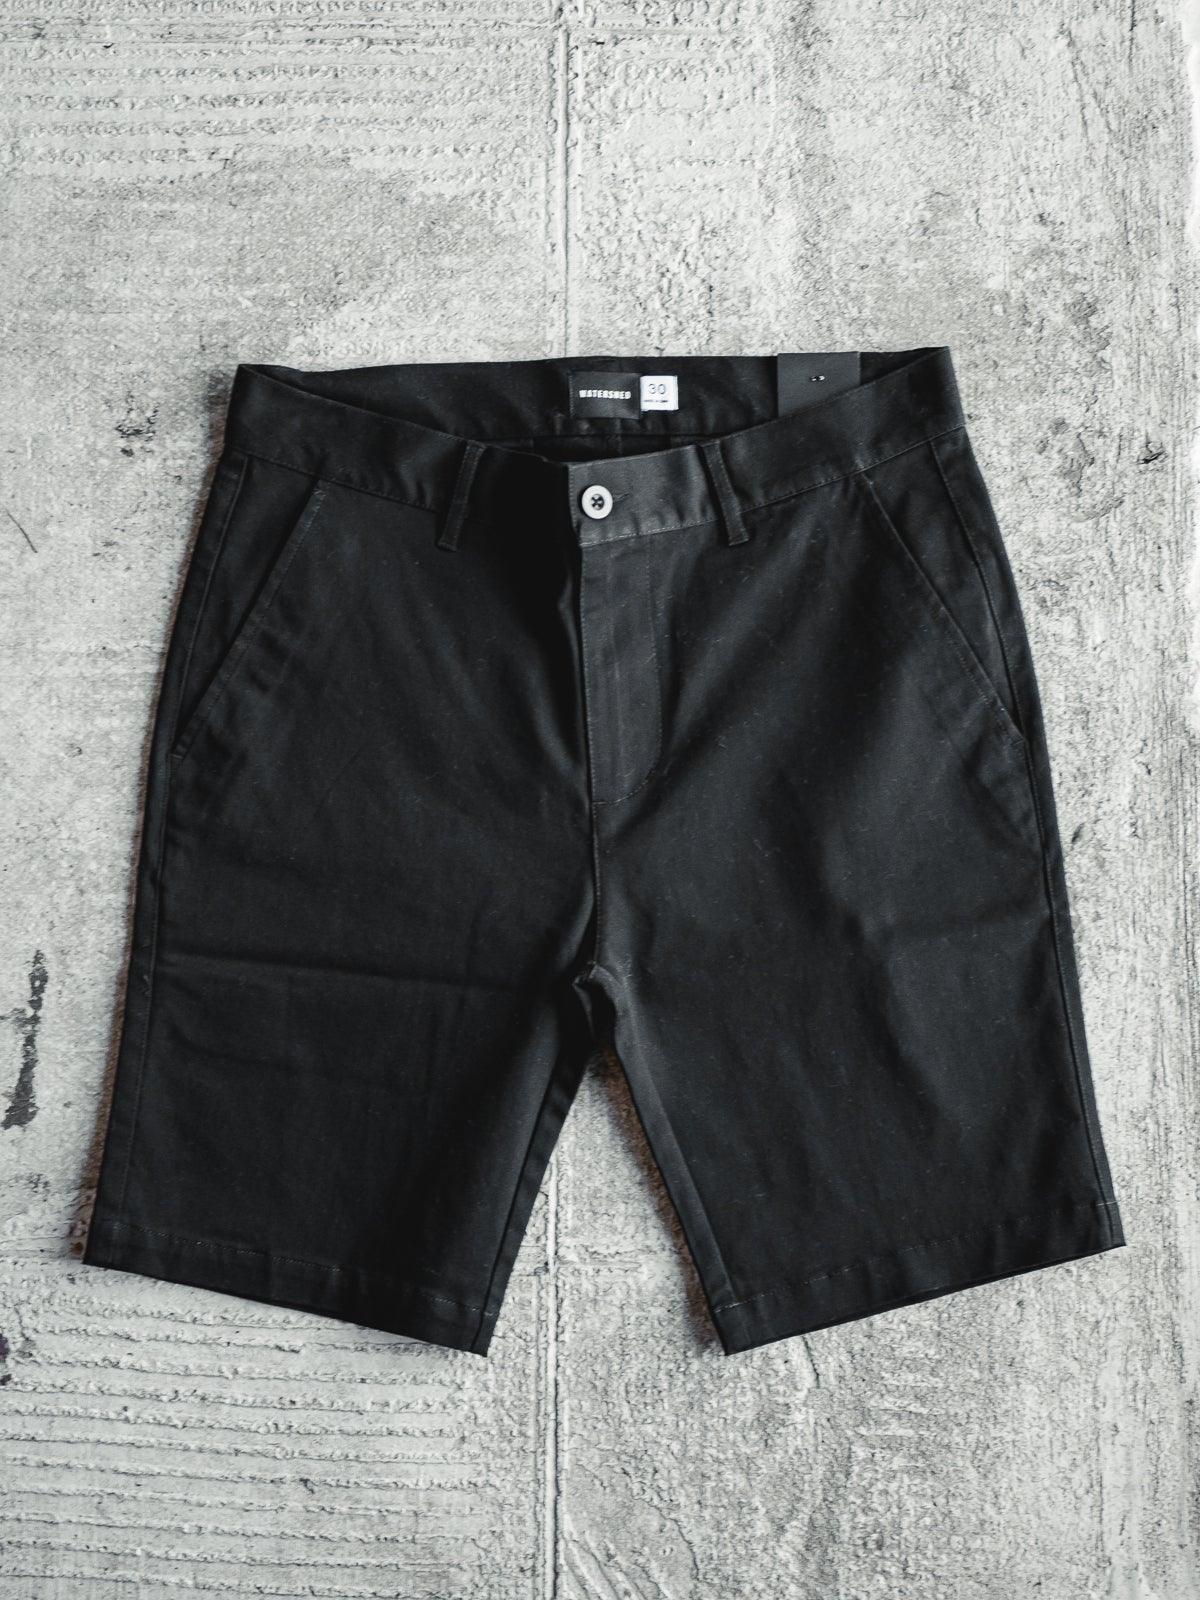 Watershed Brand | Standard Issue Shorts - Black